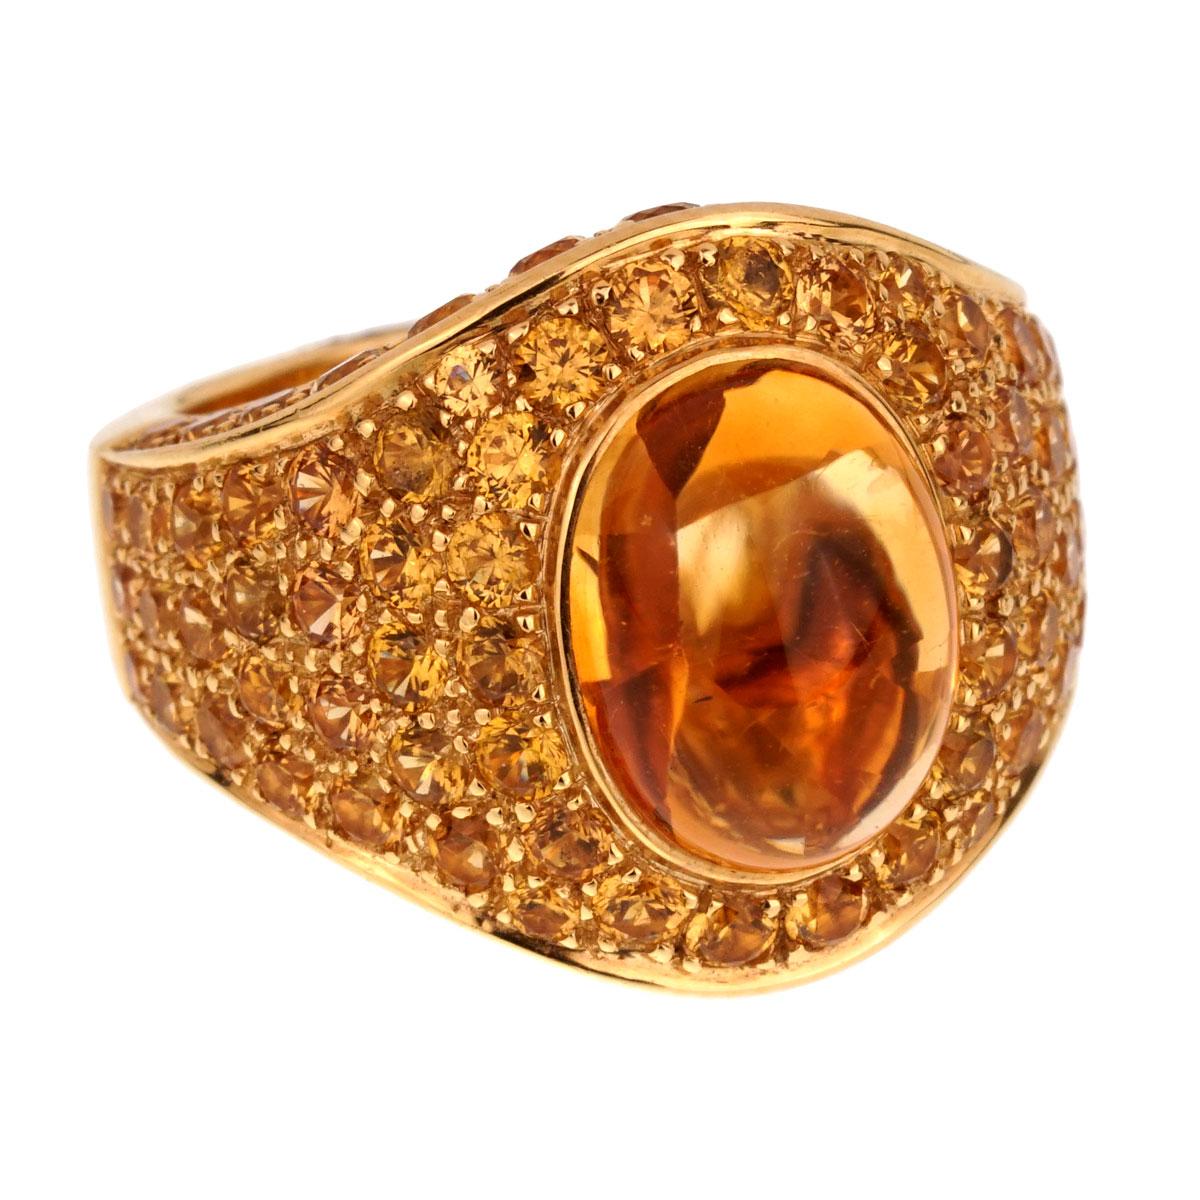 A fabulous Roberto coin ring in 18k yellow gold oval citrine cabochon 6.30ct appx and 4.6 carats of round brilliant cut citrine. The ring measures a size 7 and can be resized.